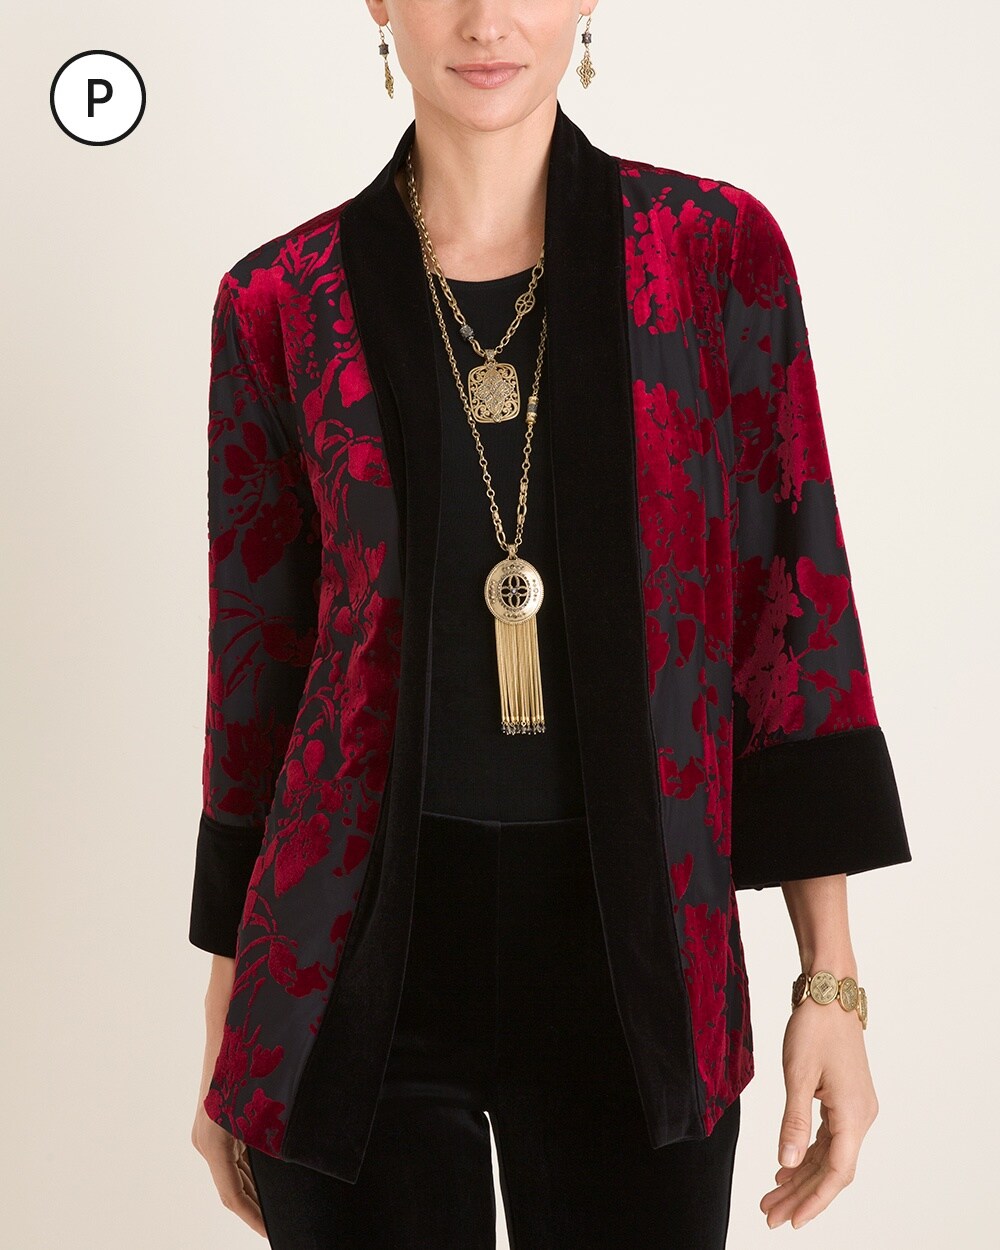 Travelers Collection Petite Reversible Black to Red Velvet Jacket